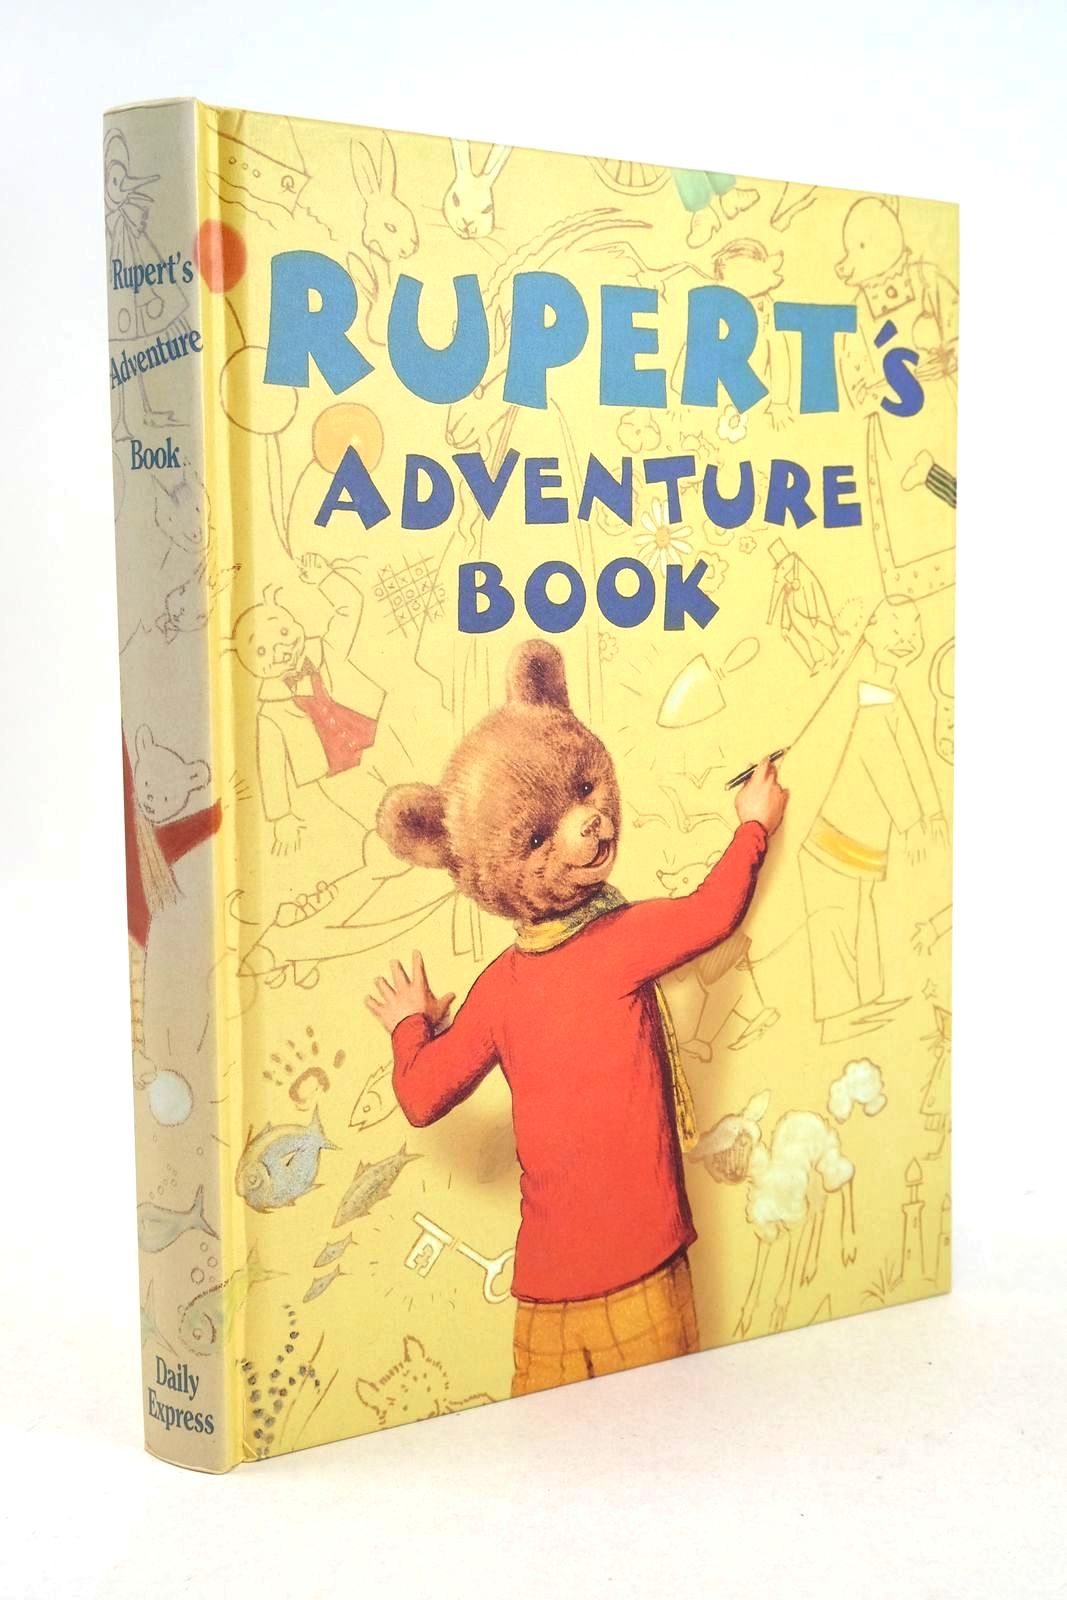 Photo of RUPERT ANNUAL 1940 (FACSIMILE) - RUPERT'S ADVENTURE BOOK written by Bestall, Alfred illustrated by Bestall, Alfred published by Annual Concepts Limited (STOCK CODE: 1326412)  for sale by Stella & Rose's Books